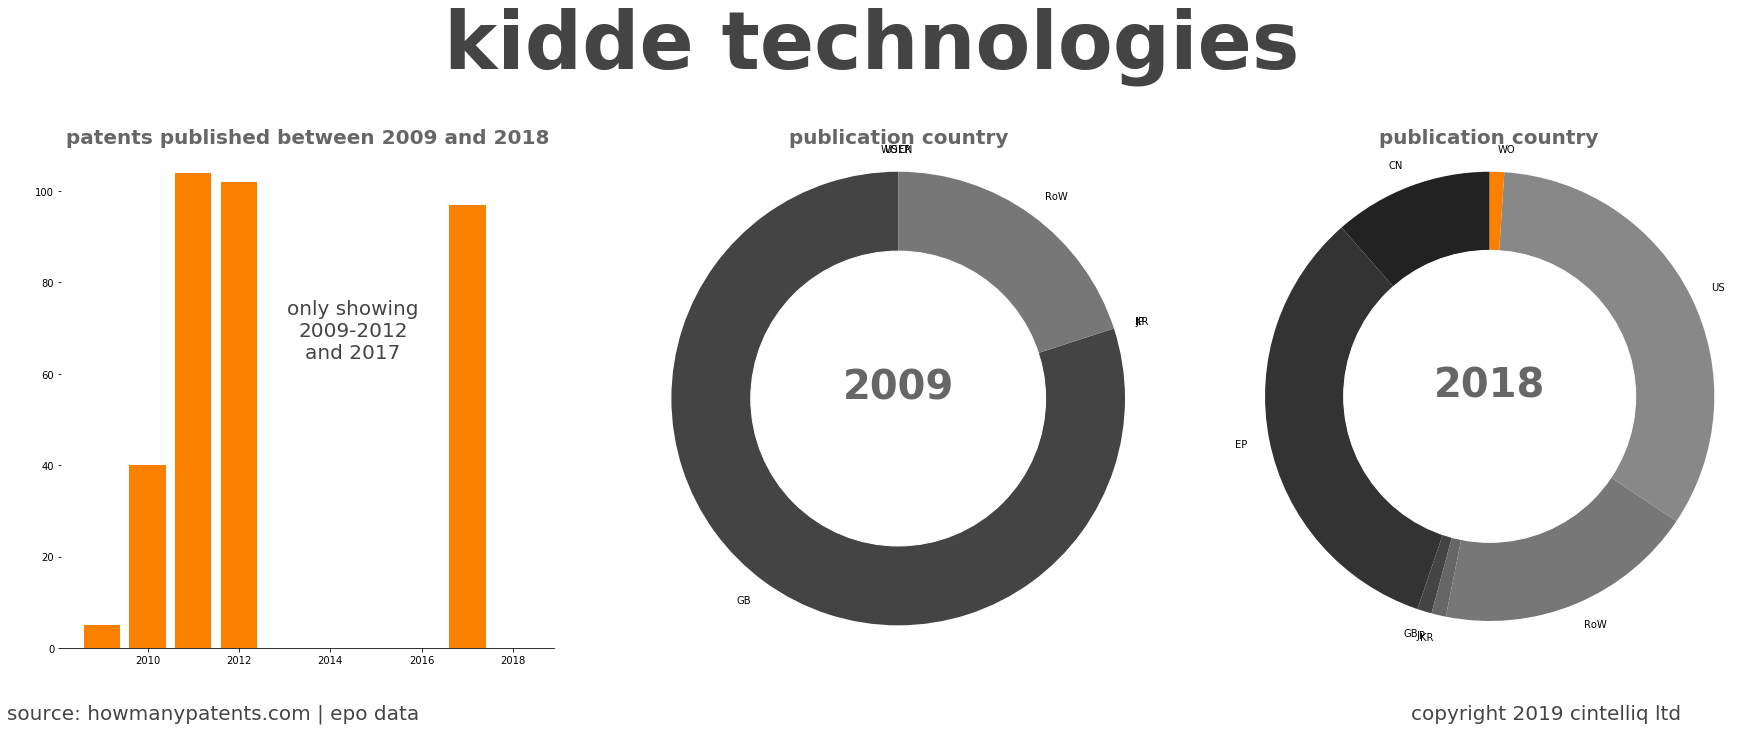 summary of patents for Kidde Technologies